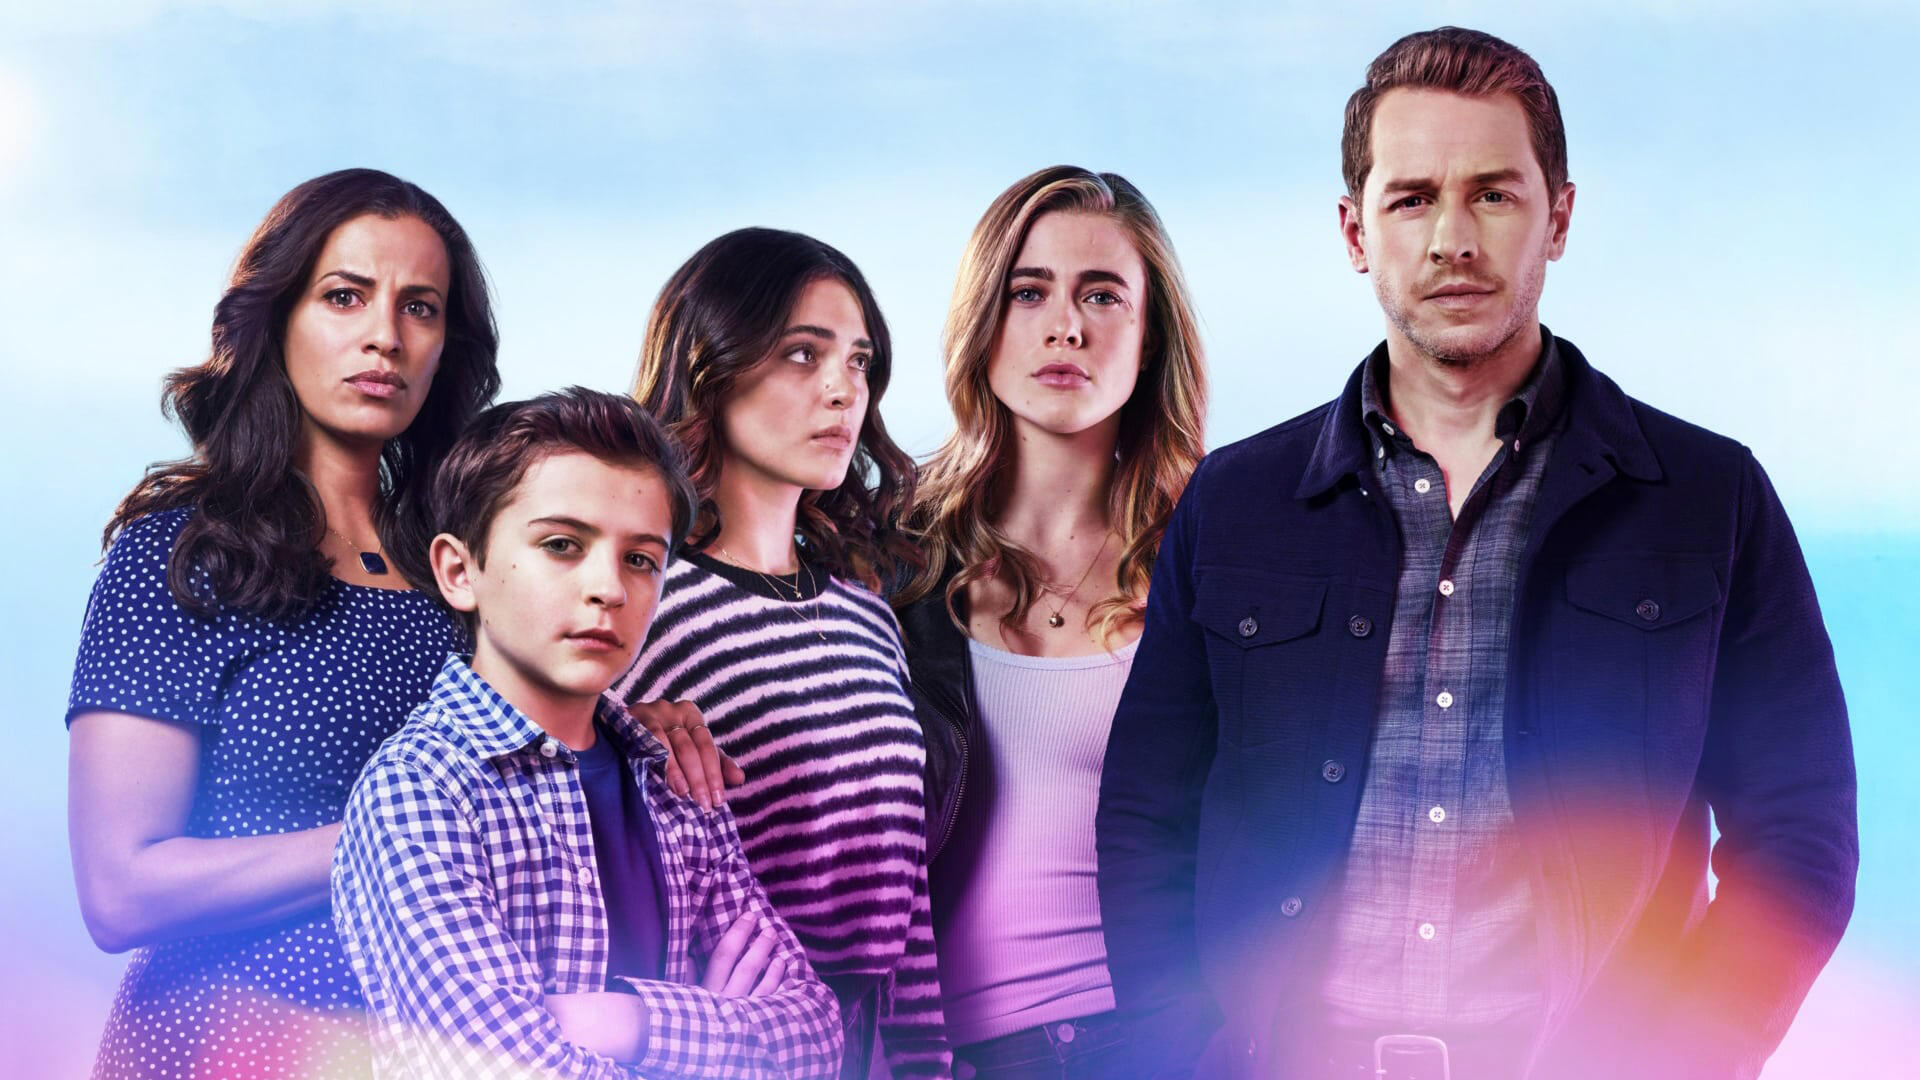 When Does Season 3 Of Manifest Come On Netflix Manifest's Season 3 Finale Drops Many Bombshells, With Show's Future TBD!